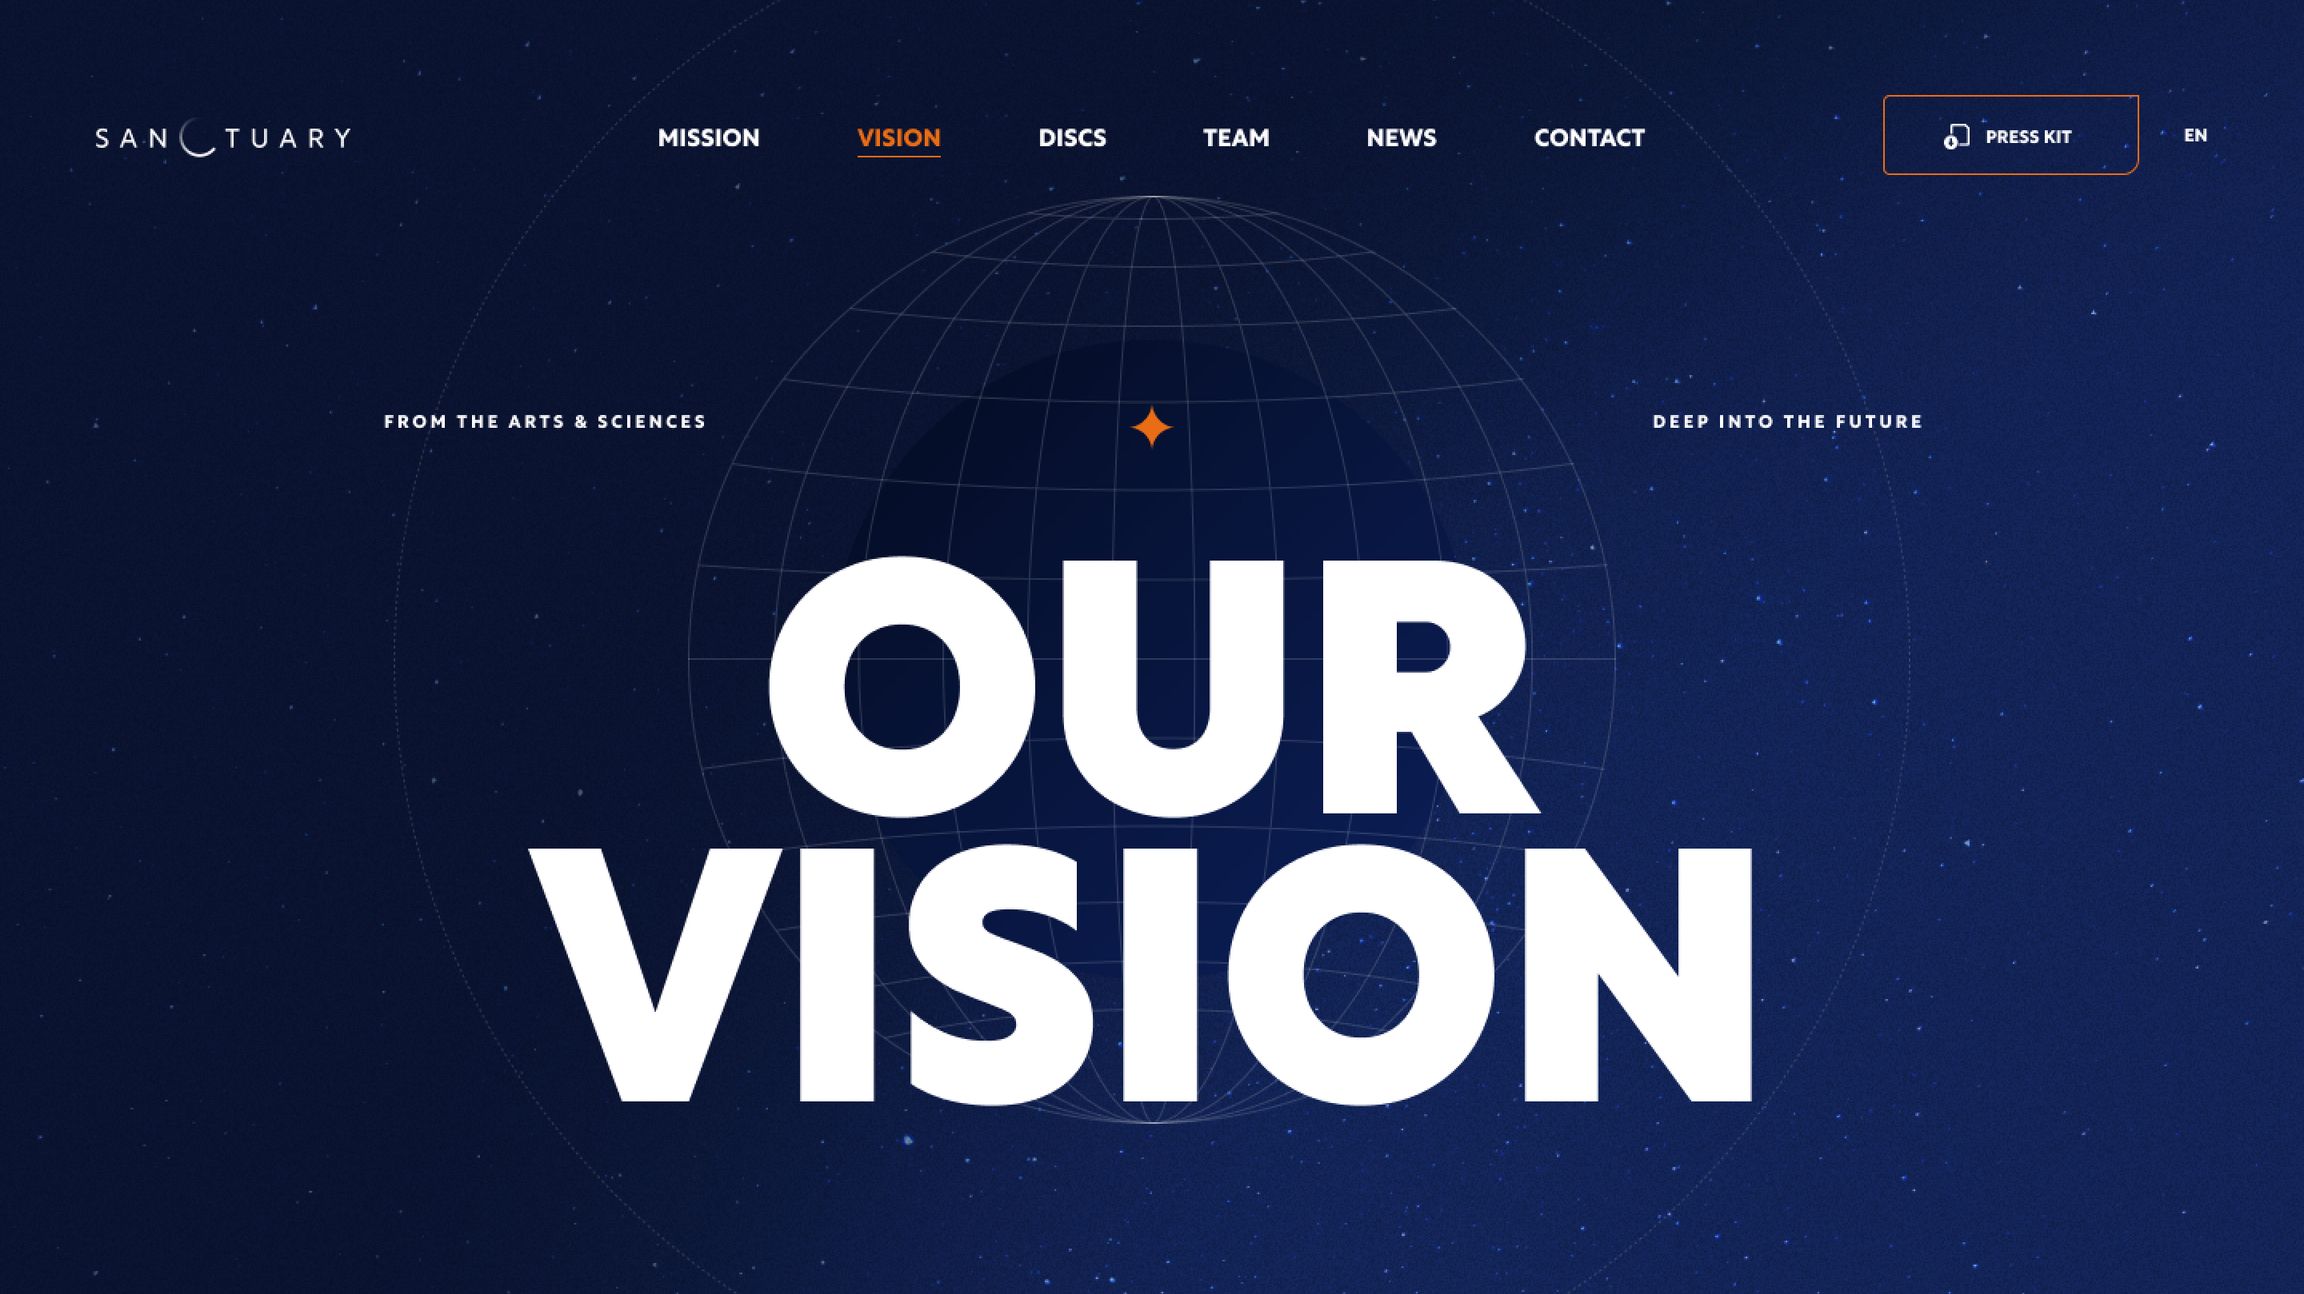 VISION PAGE Sanctuary on the moon - our vision page